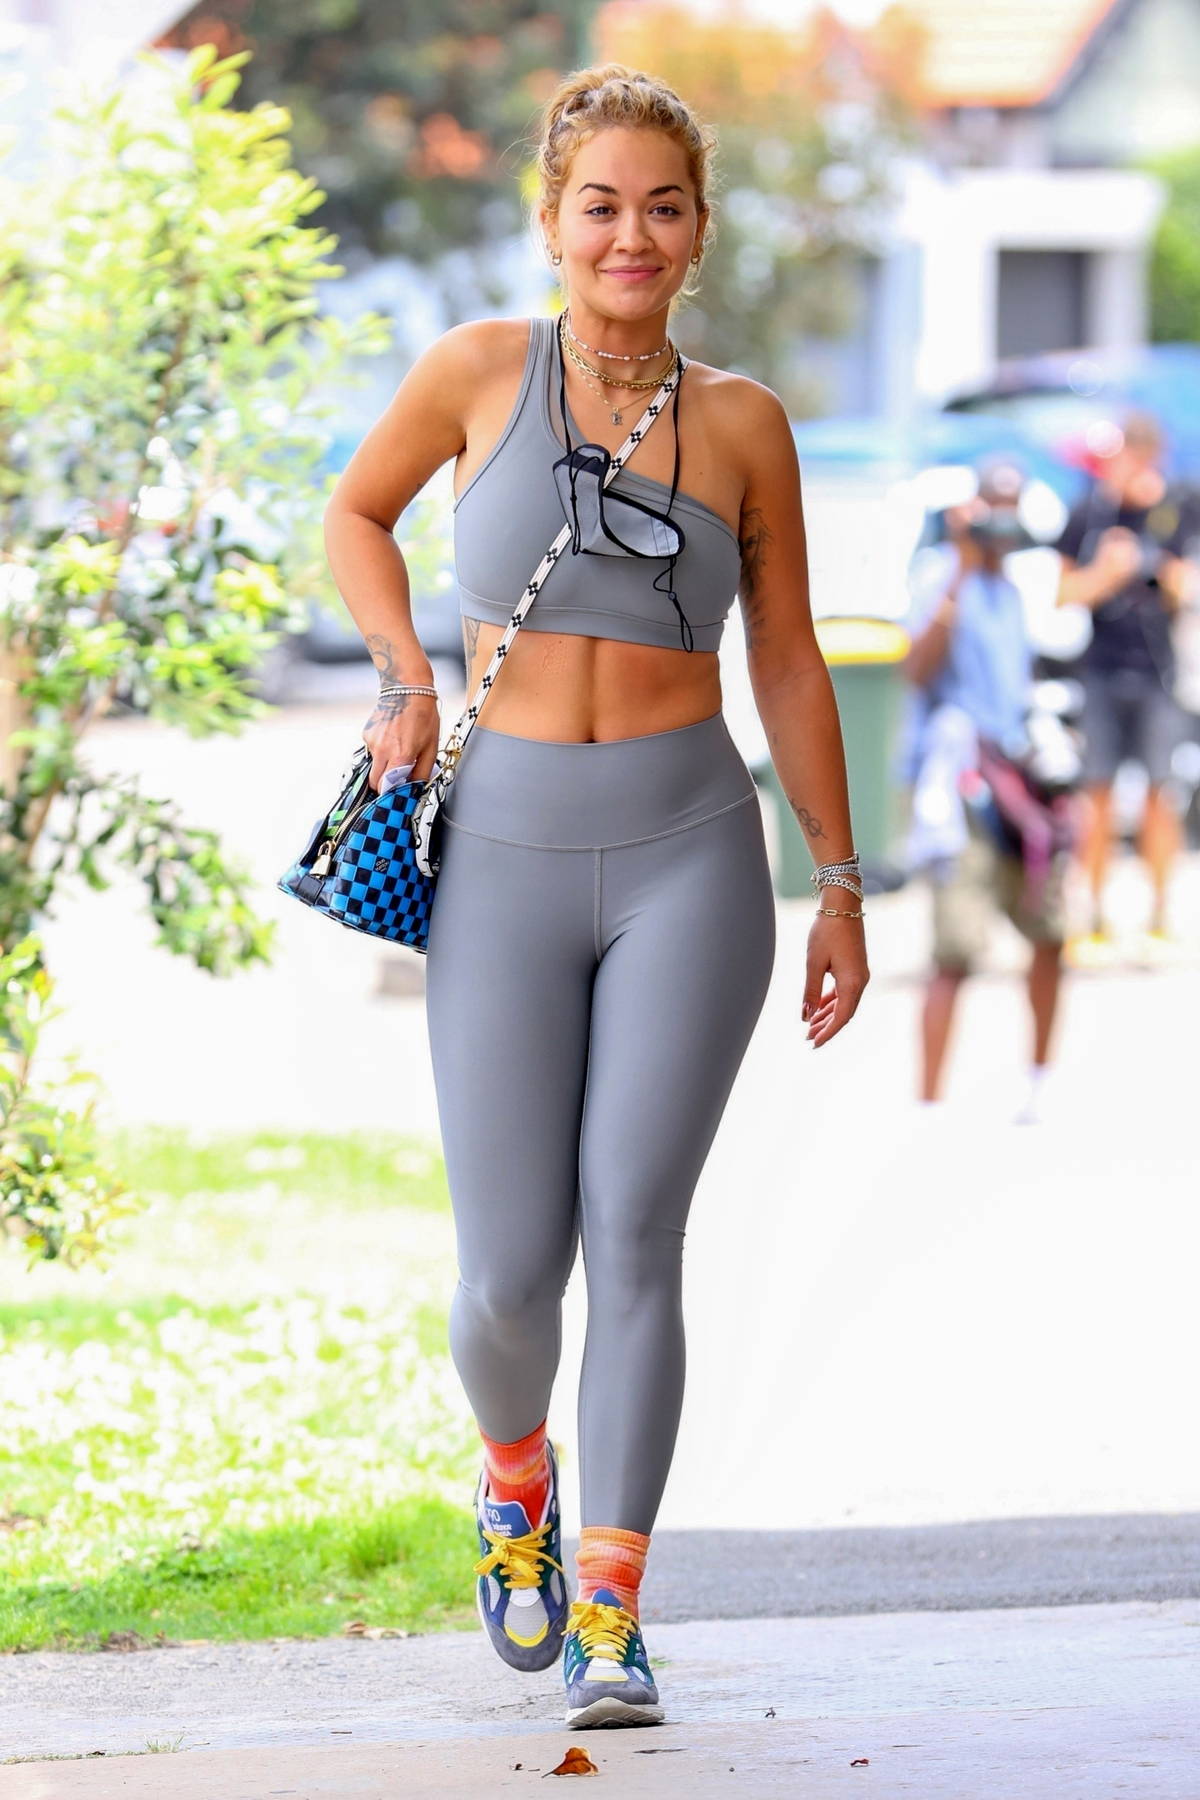 https://www.celebsfirst.com/wp-content/uploads/2021/12/rita-ora-with-shows-off-her-perfectly-toned-body-in-grey-sports-bra-and-leggings-while-stepping-out-in-sydney-australia-031221_4.jpg